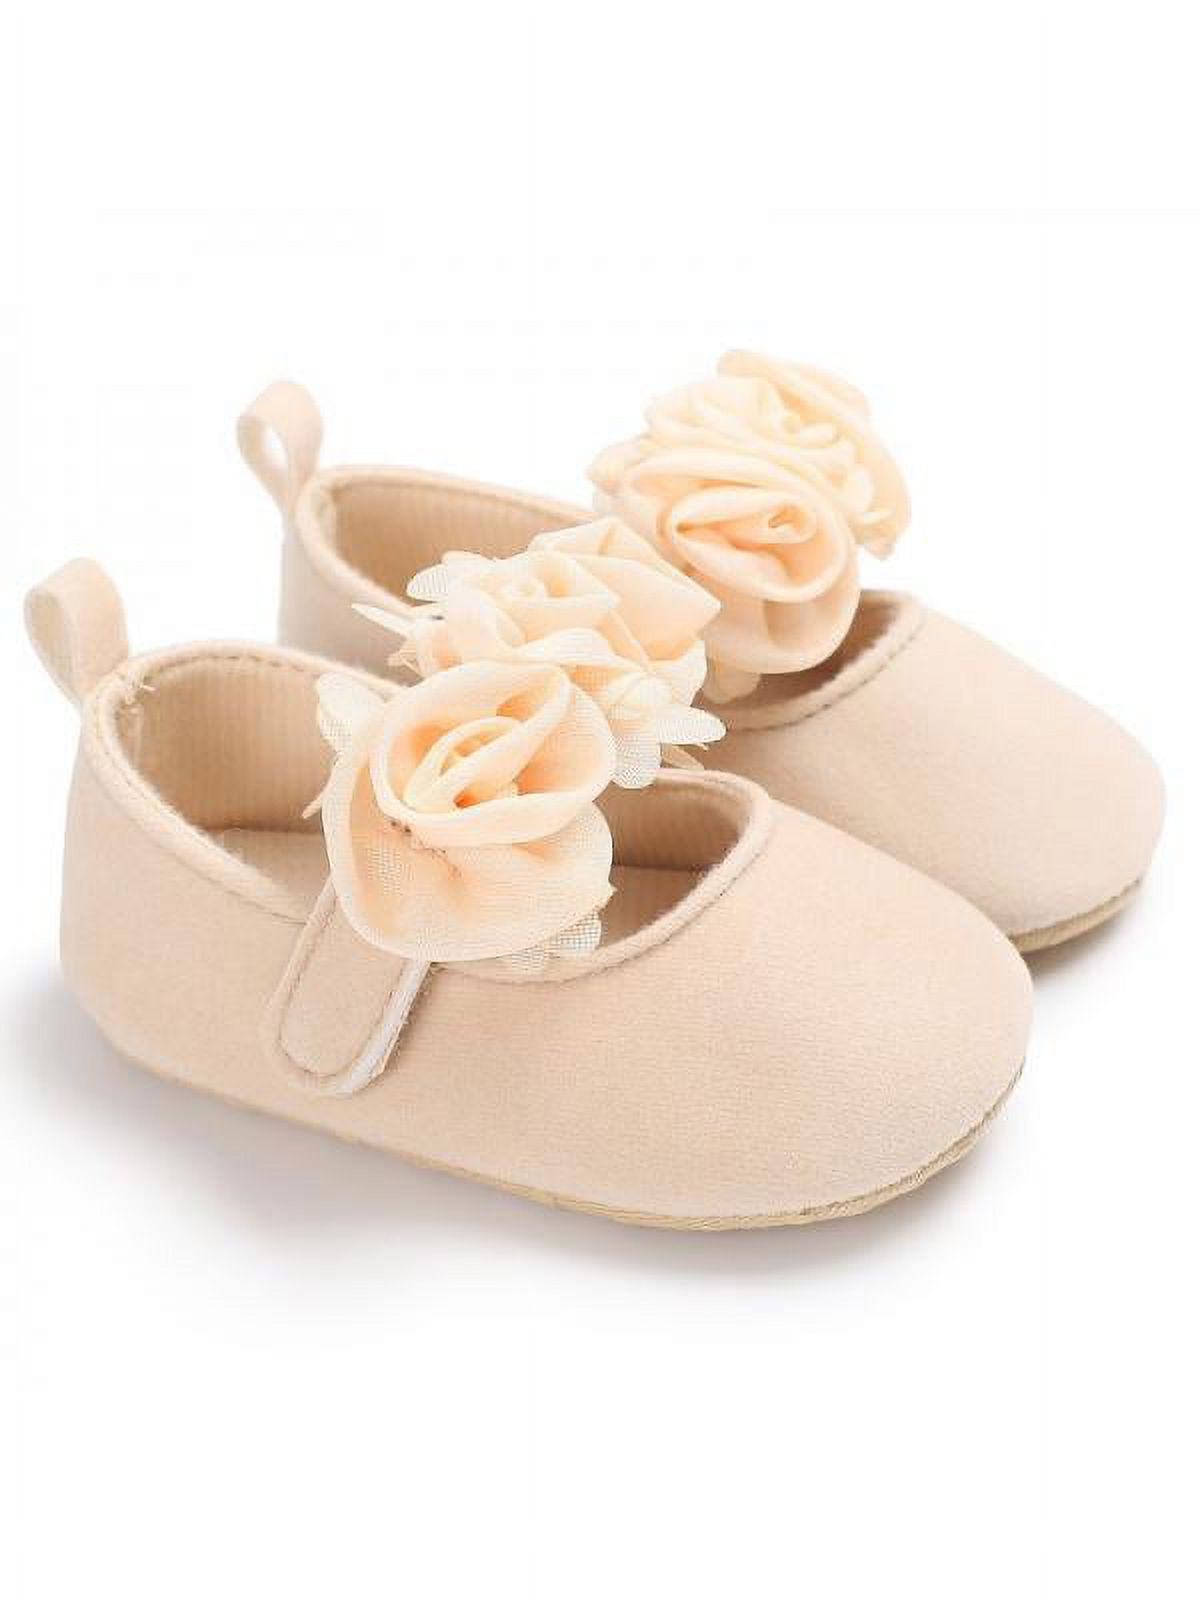 Lovely Kid Girls Princess Shoes Flowers Dance Shoes Suede Ballet Shoes Anti-slip Soft Sole Crib Hook & Loop Shoes (Toddler/Little Baby Girls) - image 1 of 7